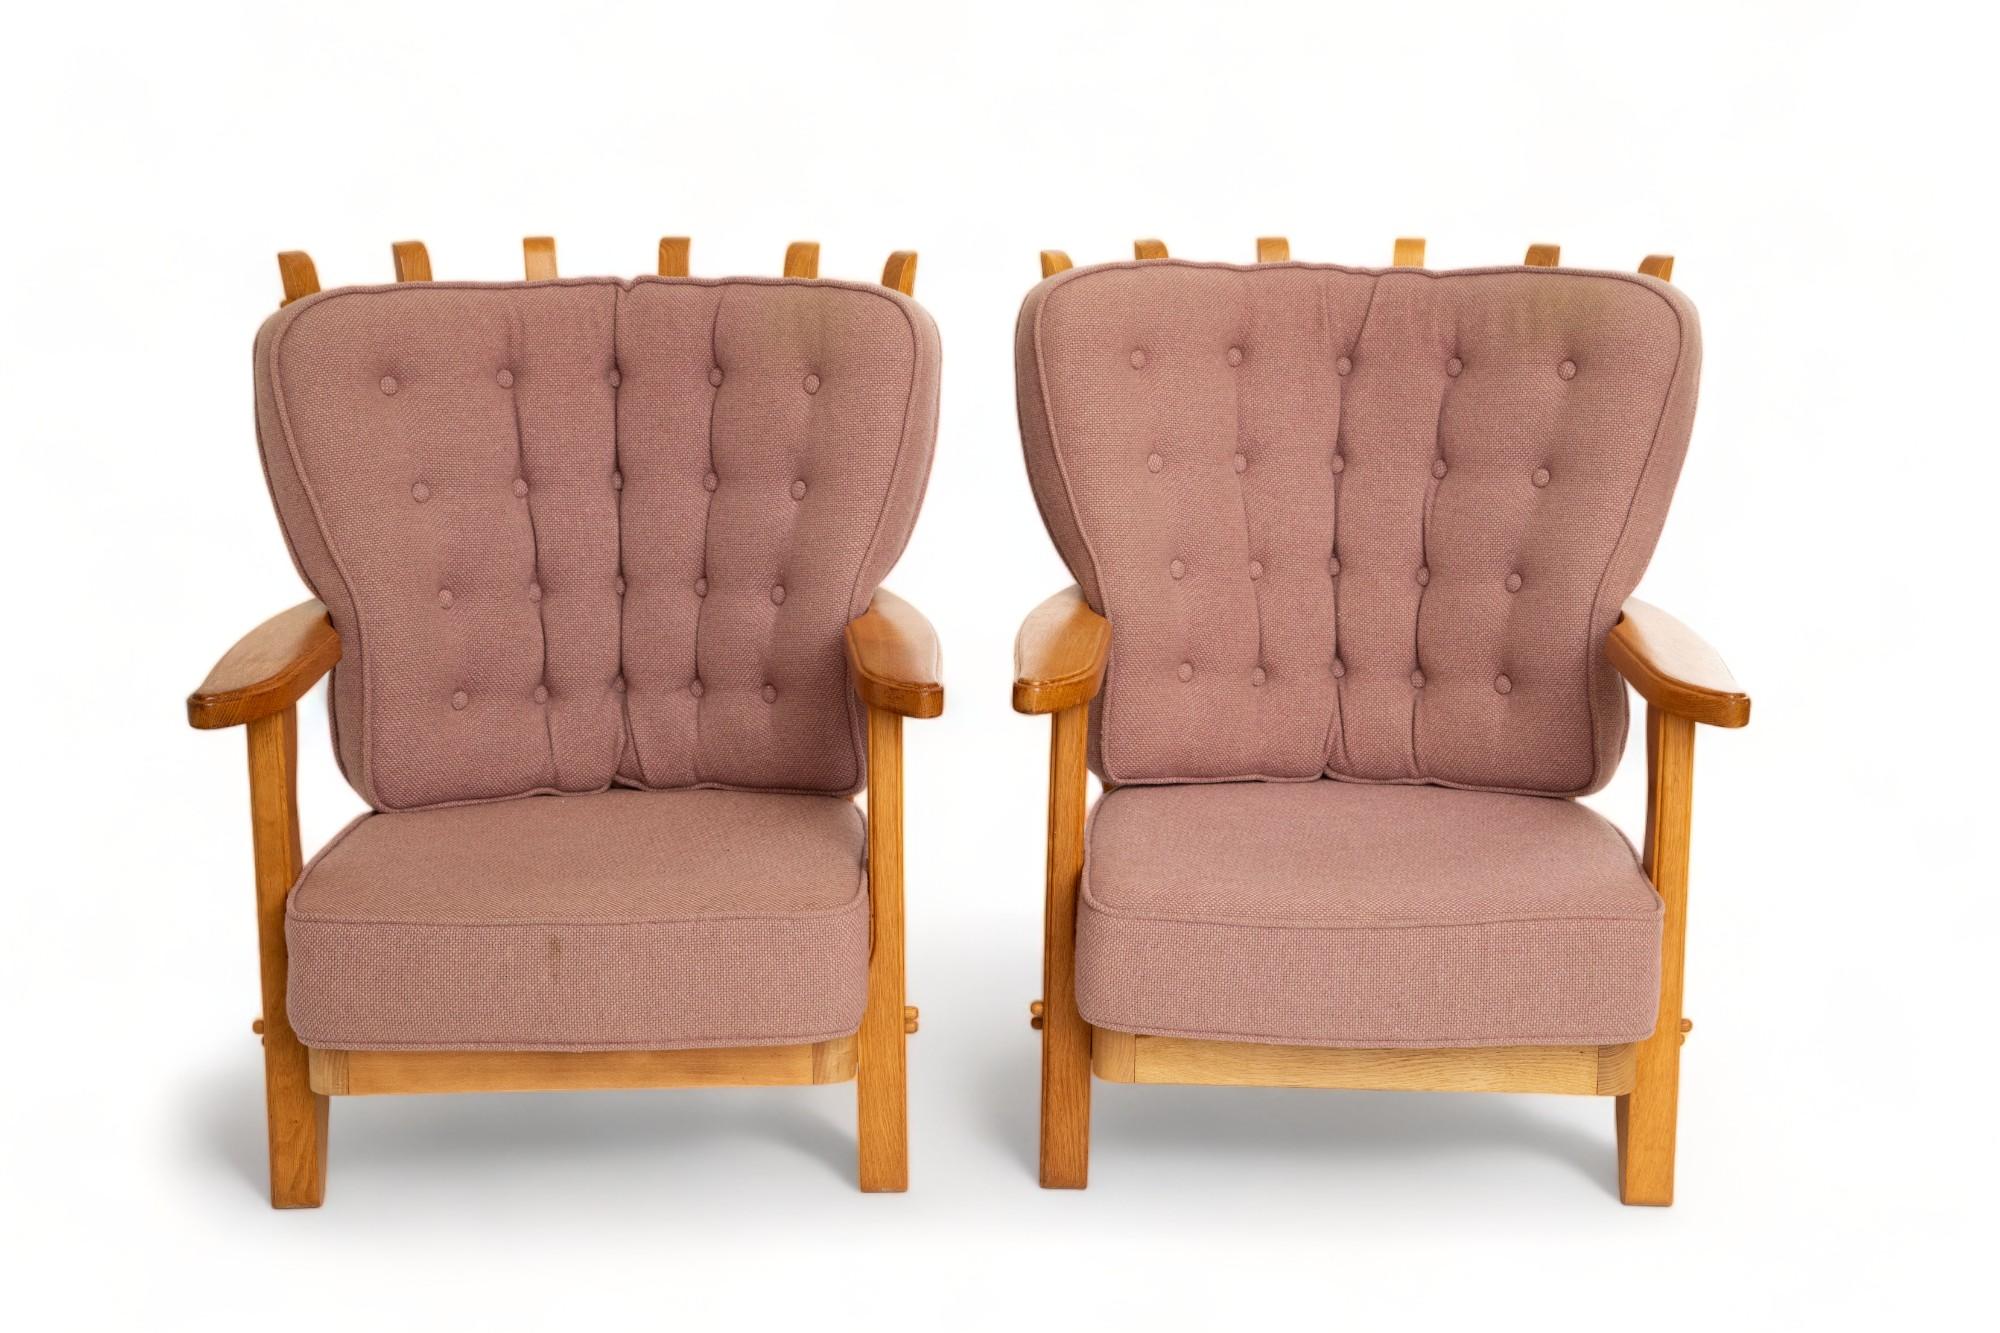 Pair of oak lounge chairs by Guillerme et Chambron, France 1960
This model is a mid repos 
Sculptural organic shape, finger back 
Retains a beautiful warm patina
These chairs have their own original wool fabric, light purple
Could be upholstered to